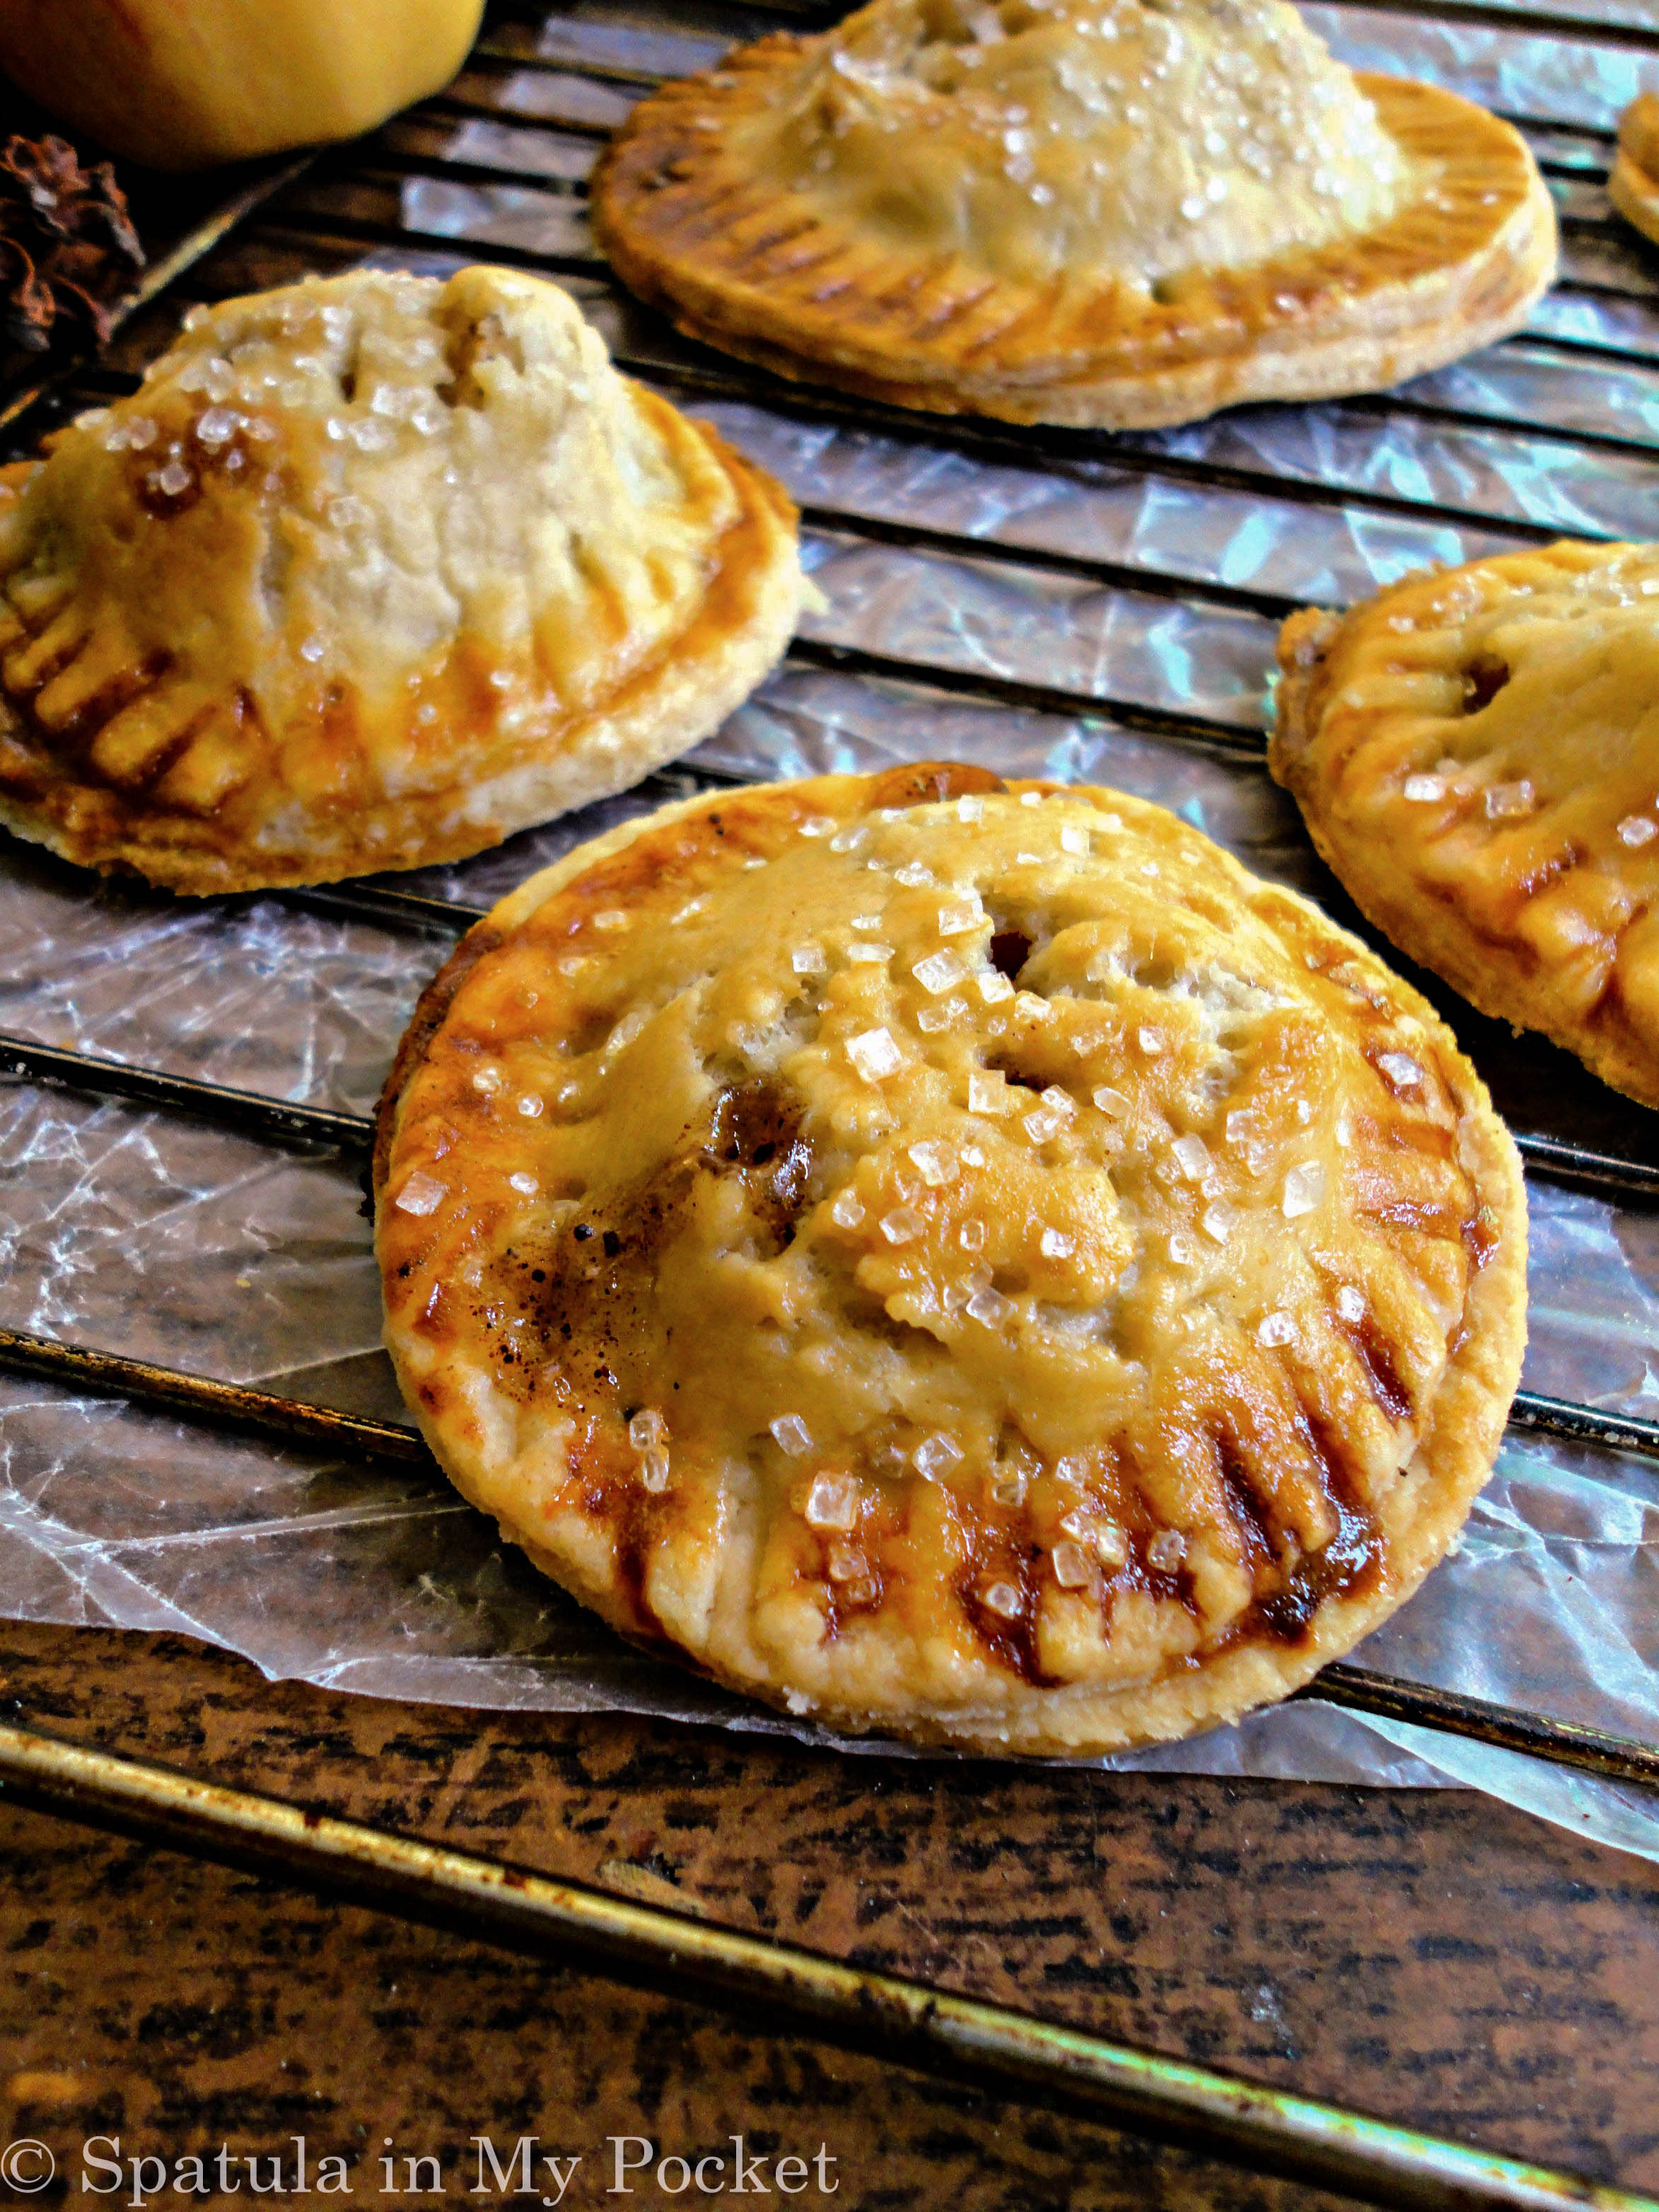 Mini apple pies. The flaky buttery crust filled with a cinnamon scented apple filling should definitely be on your to-bake list this winter!